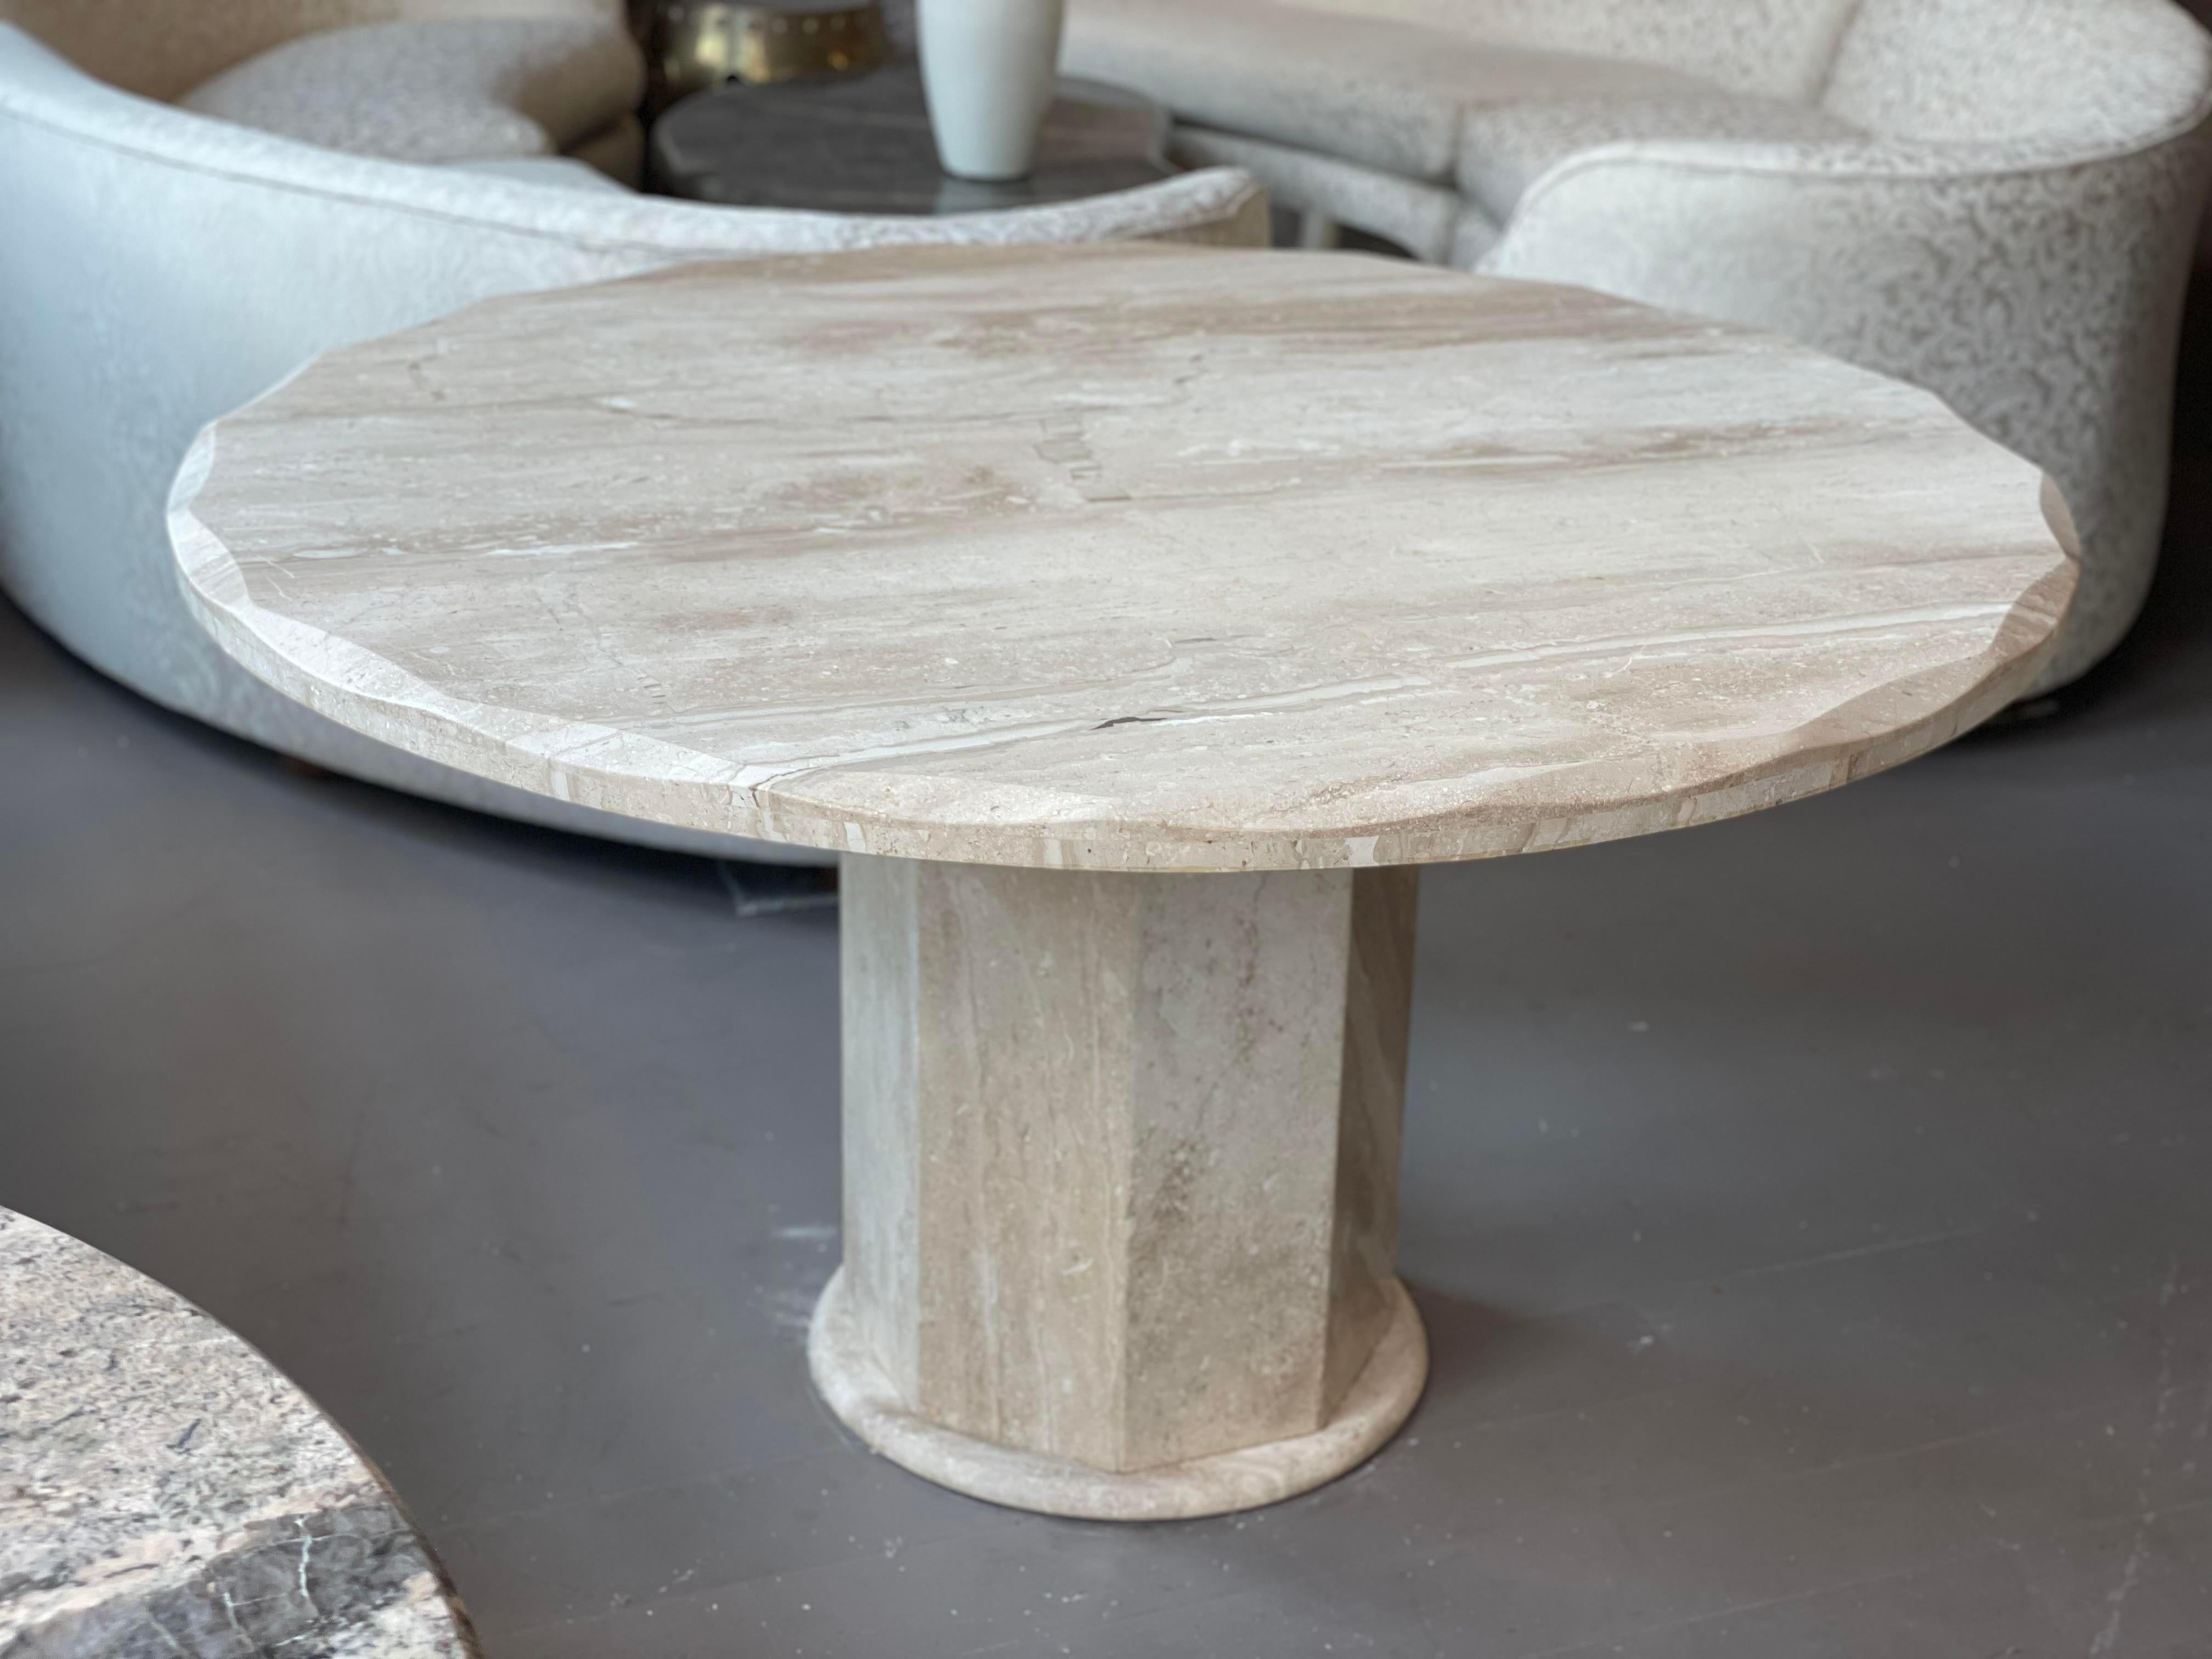 1980s Travertine Scalloped Edge Postmodern Dining Table For Sale 5